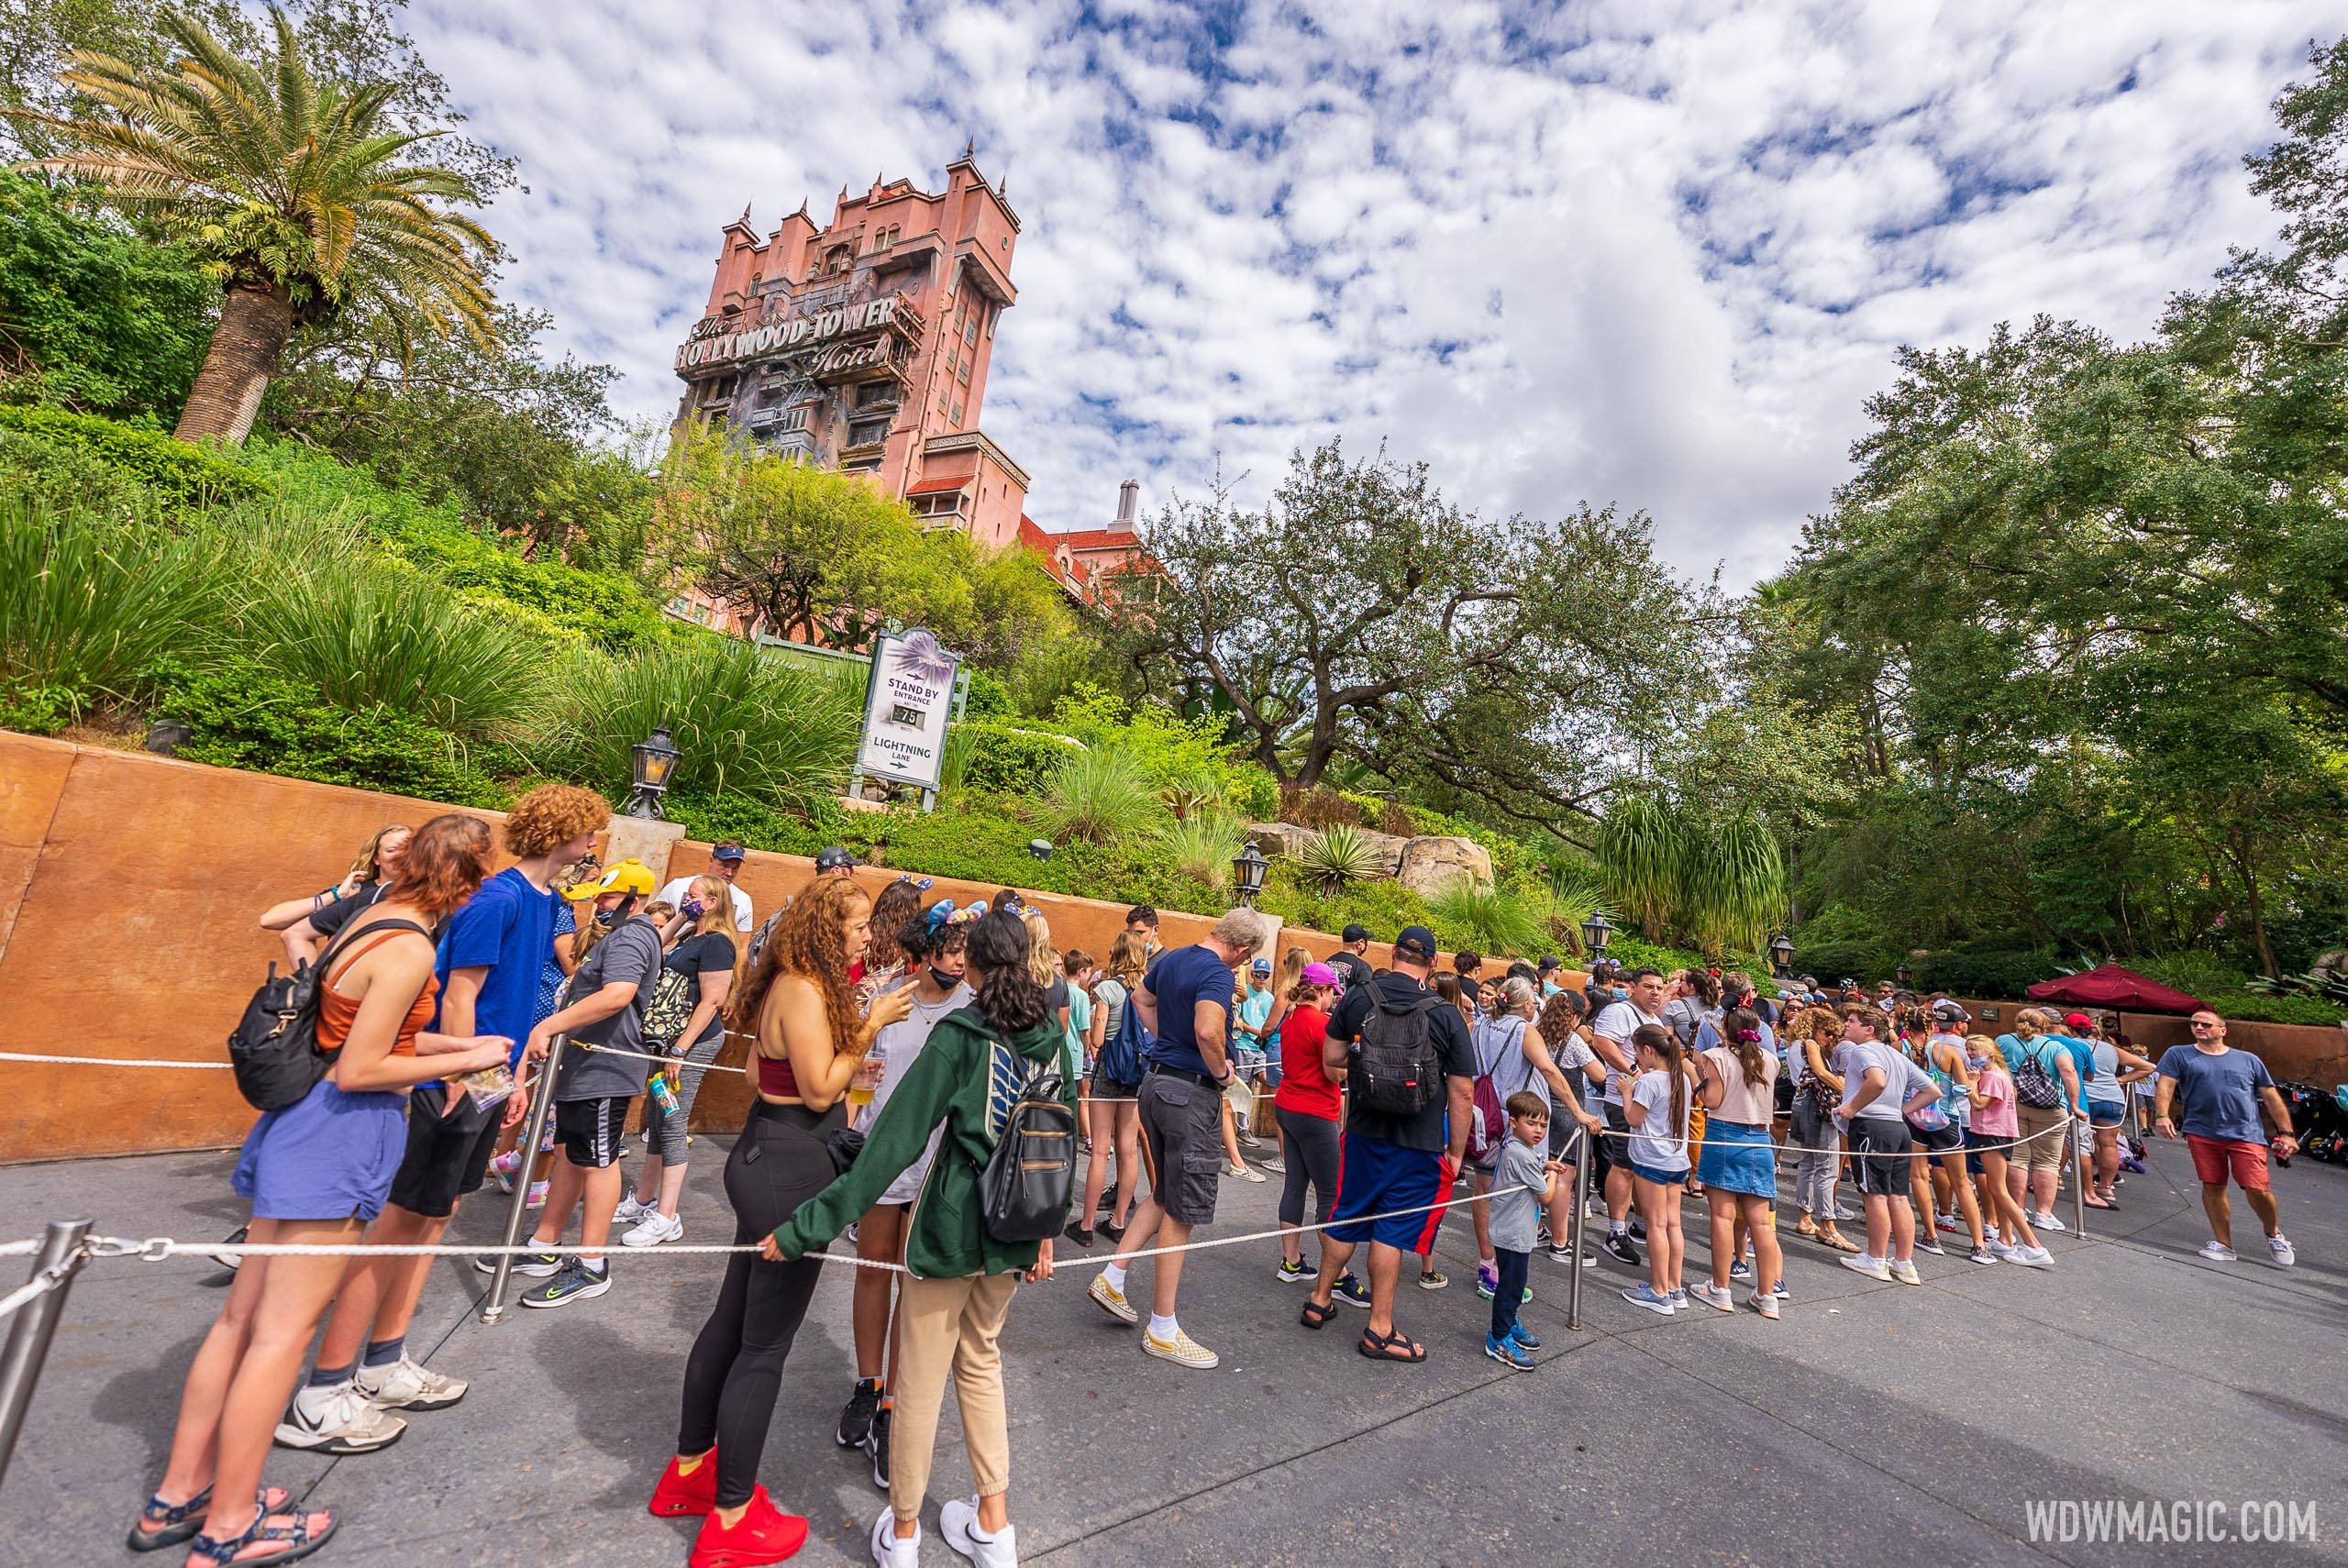 Tower of Terror at Disney's Hollywood Studios experiencing longer wait times than usual with only one side of the ride system in operation